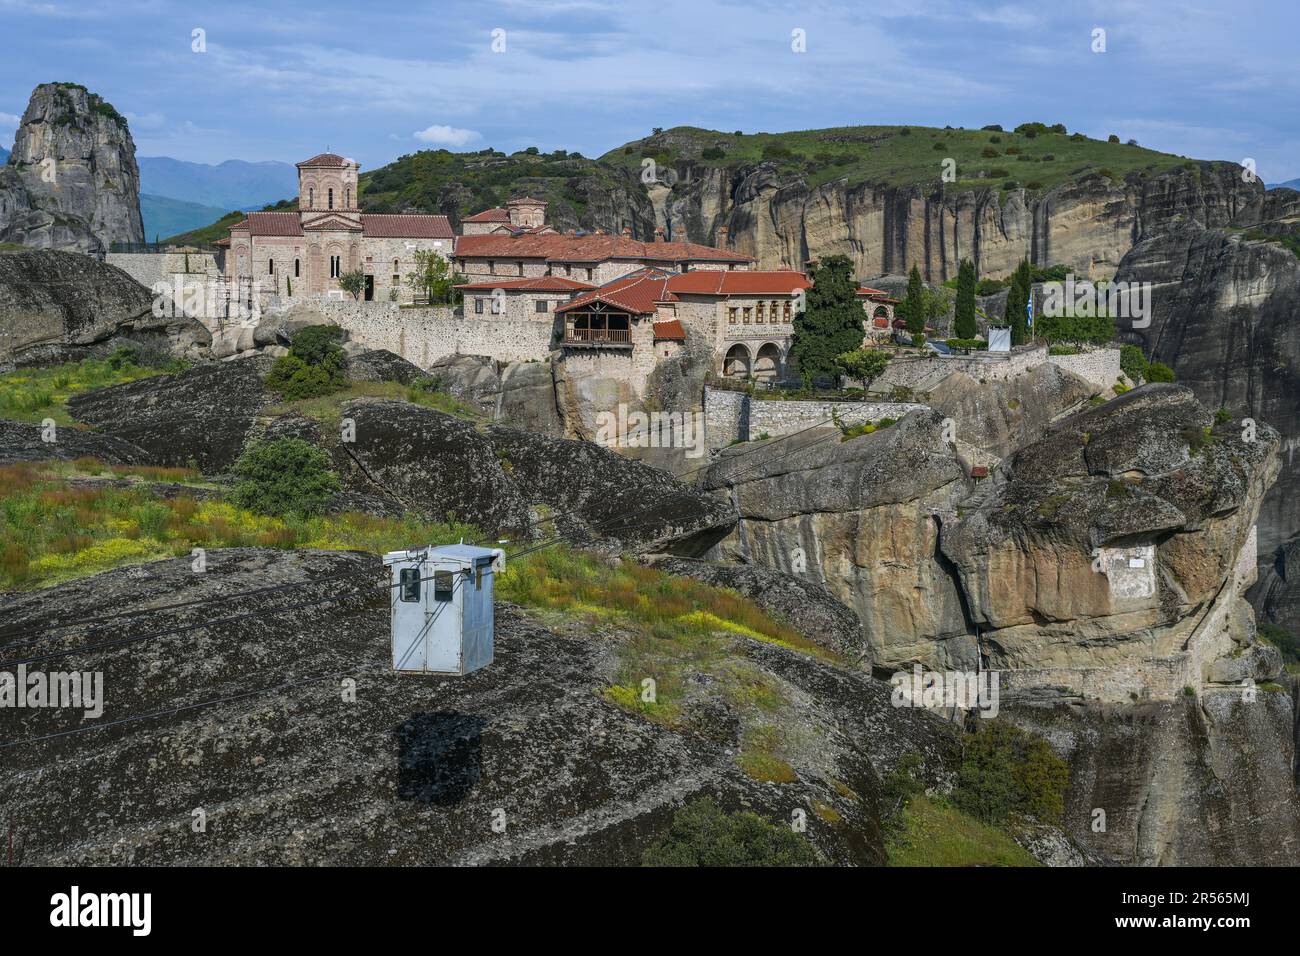 Gondola on a cable winch as access to the Monastery Agia Triada (Holy Trinity) in Meteora which was built high on the top of a rock in the mountain la Stock Photo